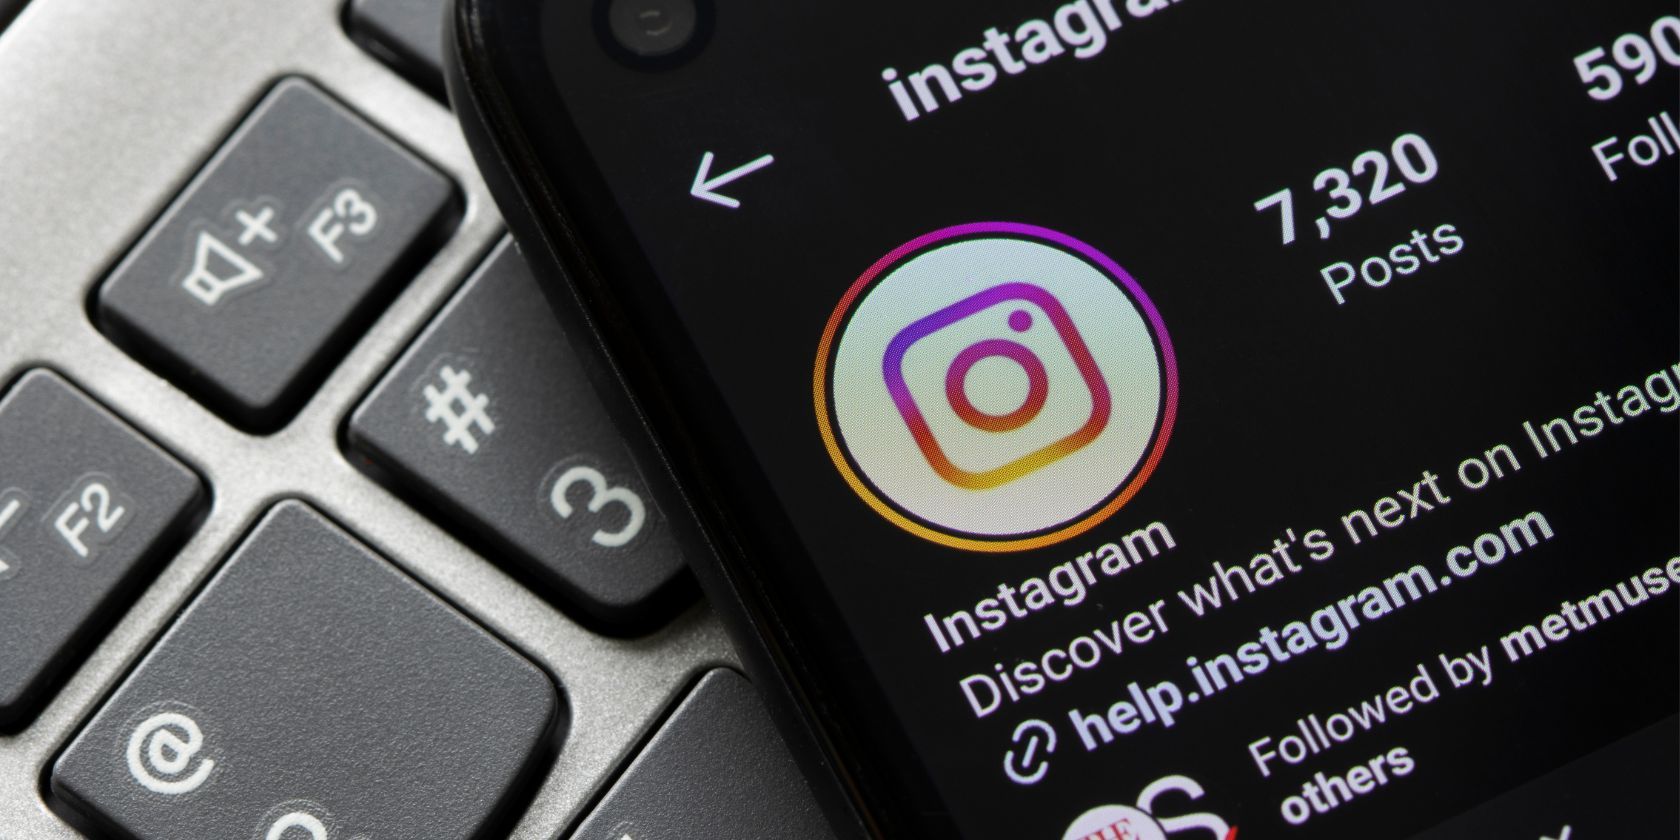 Instagram official account page seen on the Instagram mobile app on a smartphone